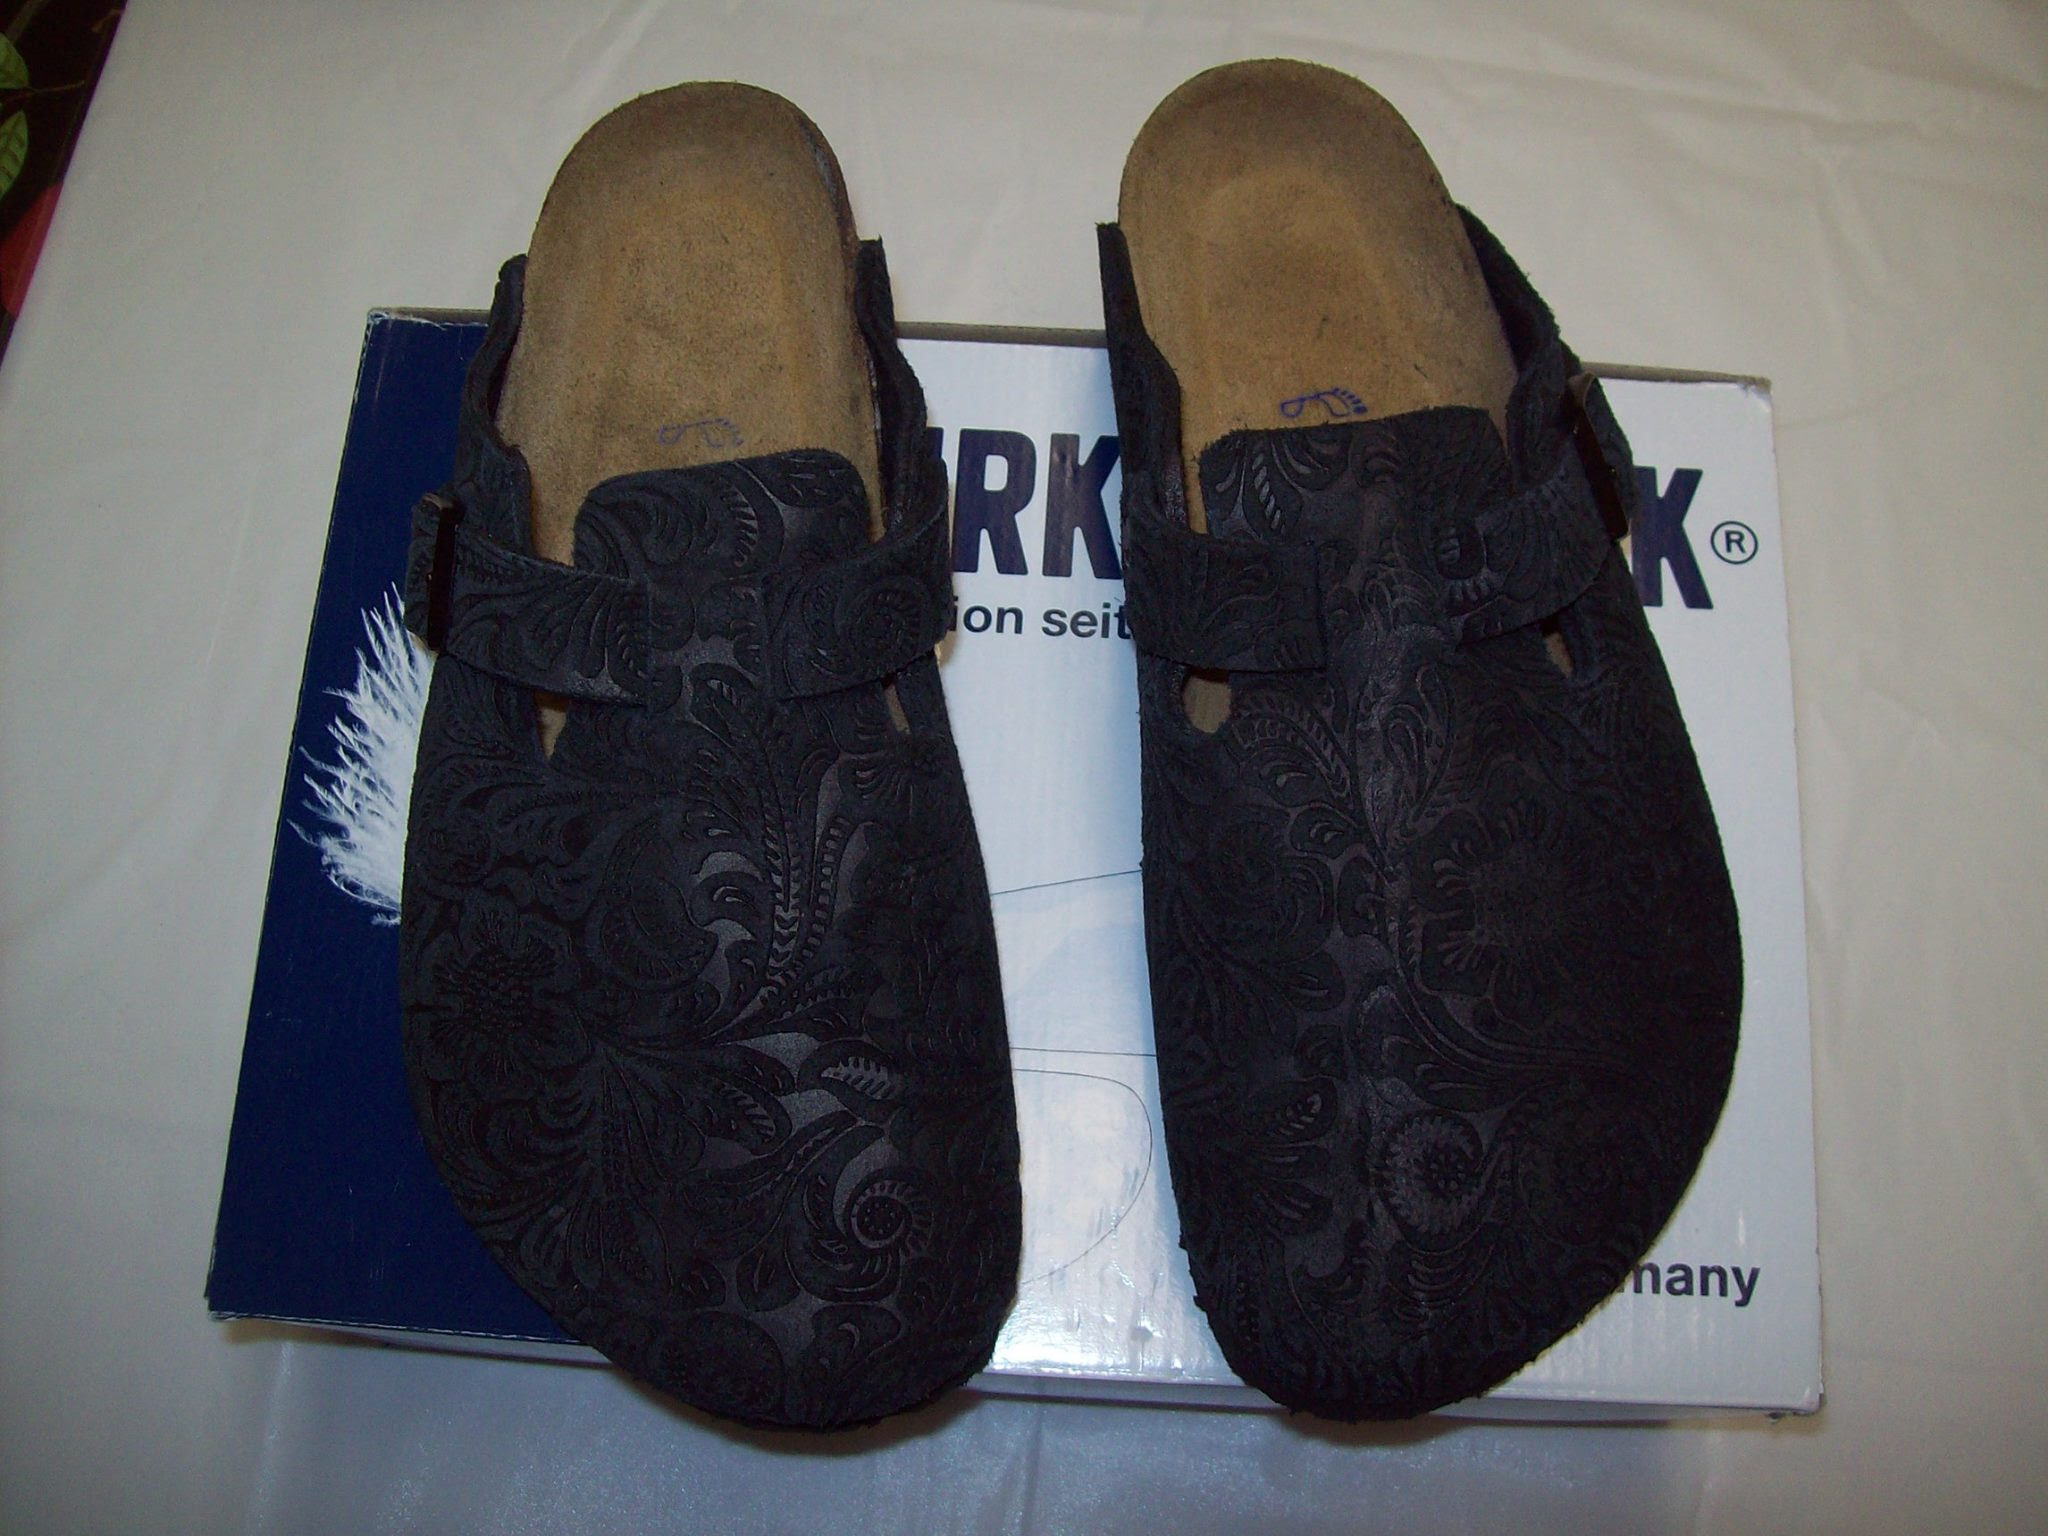 These are a 1 of 1 custom Birkenstock Boston featuring embossed